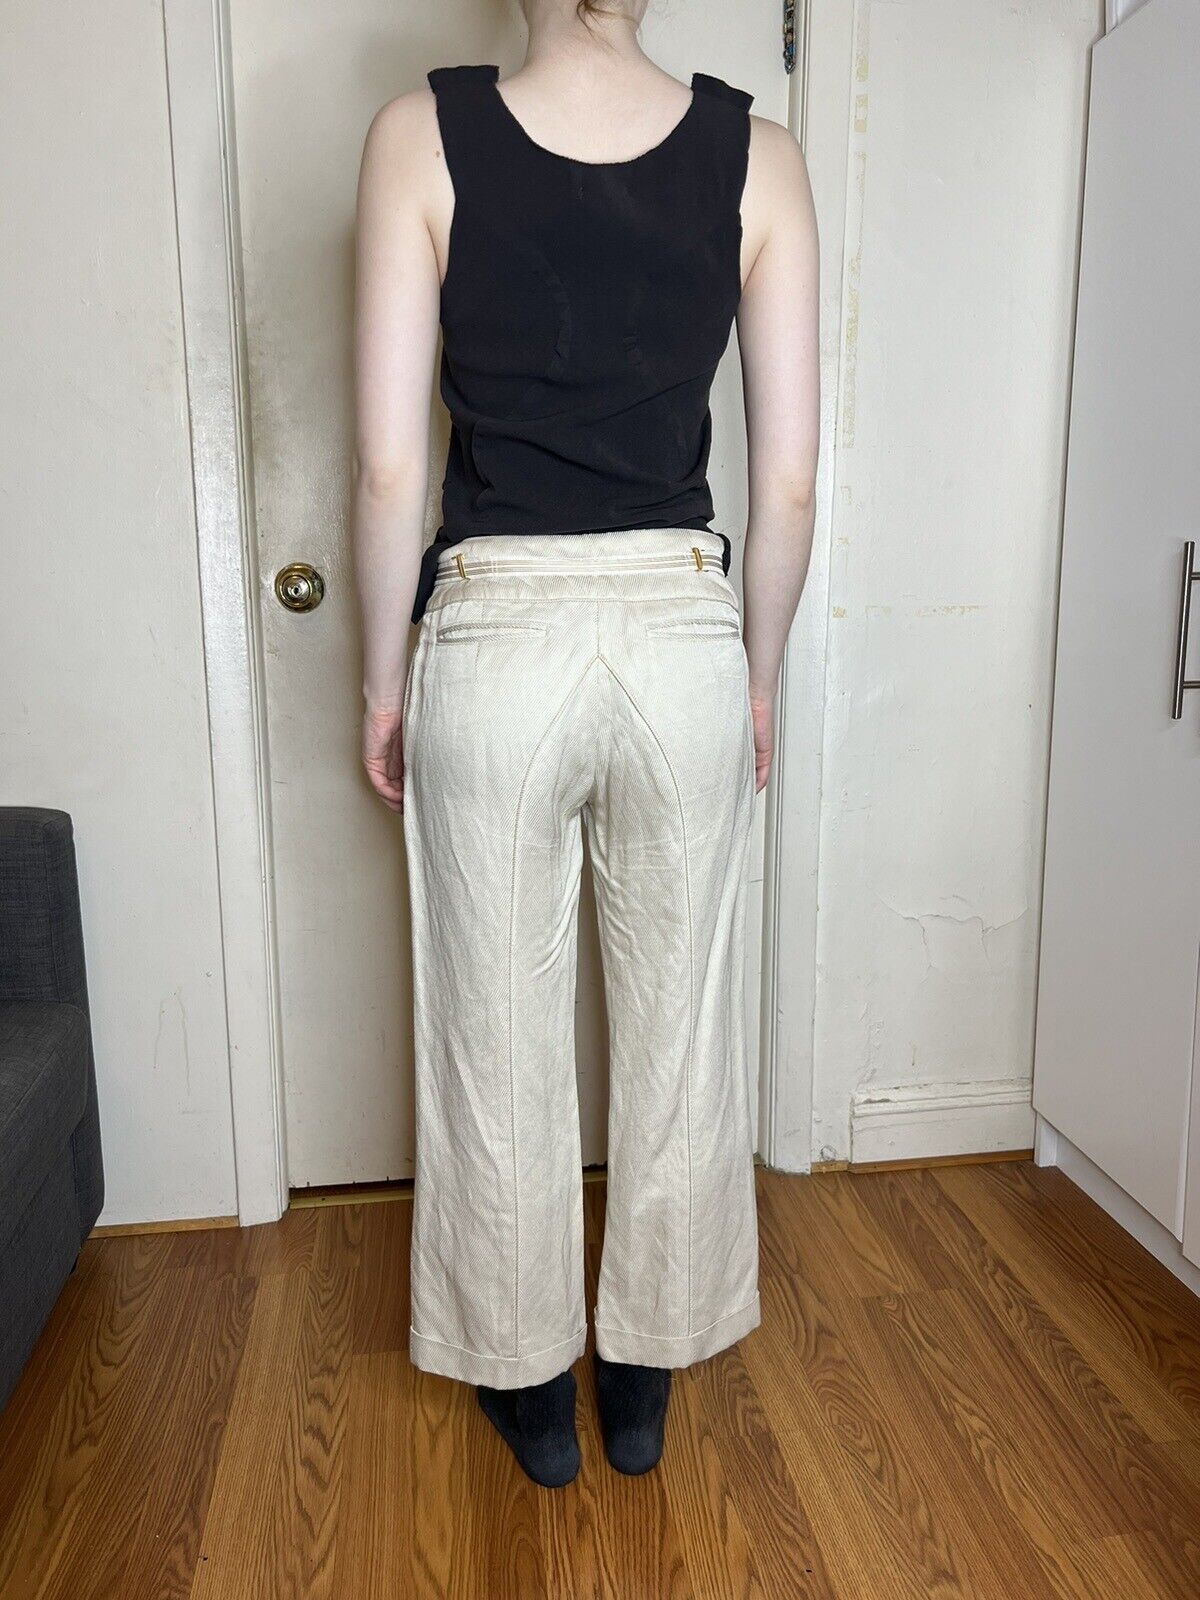 Undercover S/S 2008 Summer Madness Pants, Size 2 - image 3